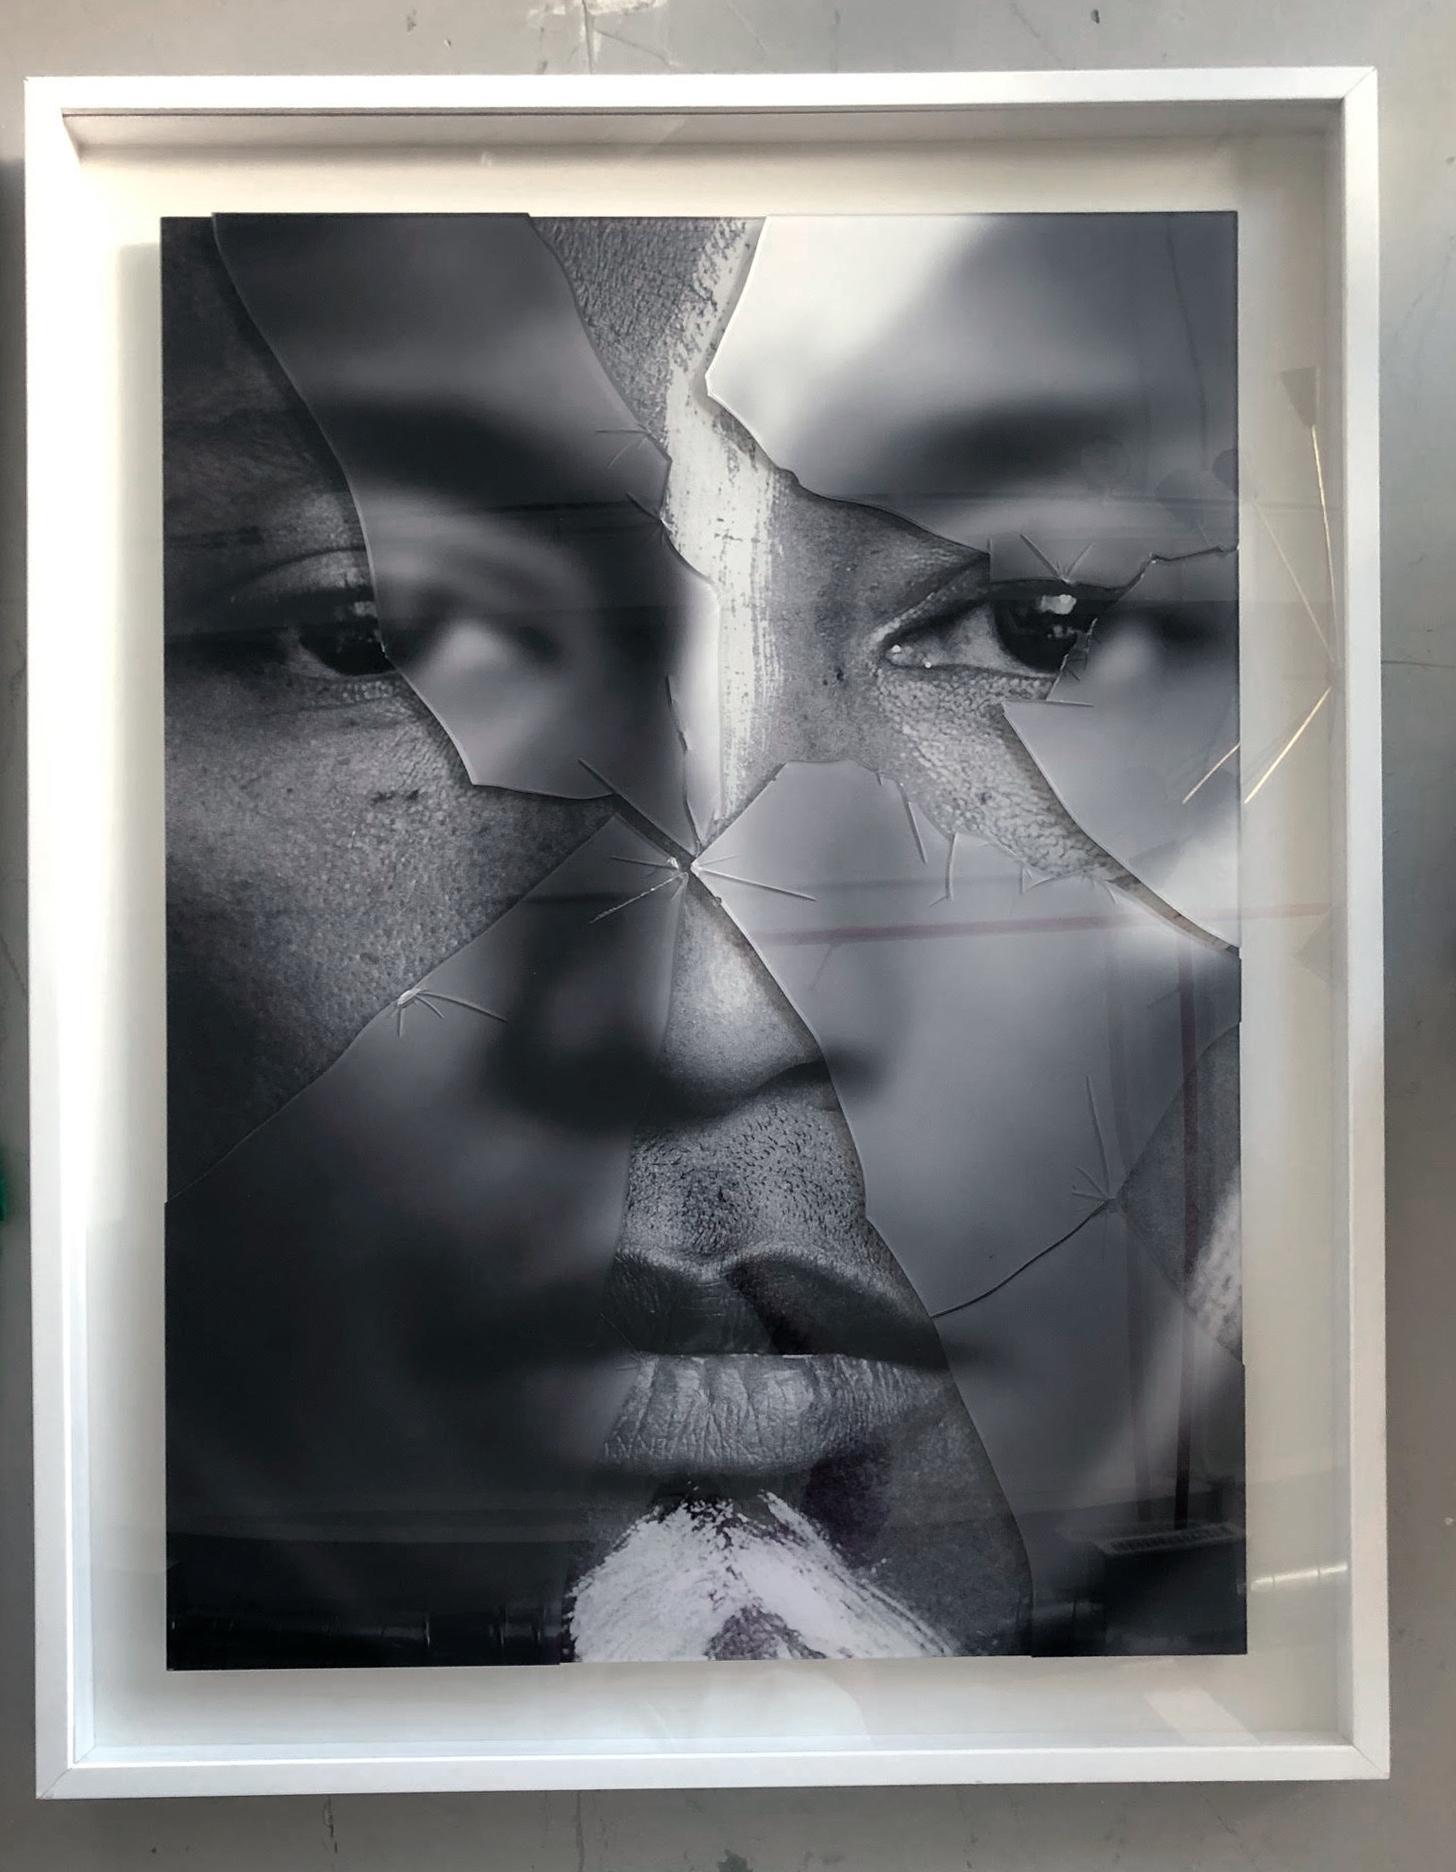 Pharrell Williams 3 and 4, Portraits, Intervened by the artists - Black Black and White Photograph by Hunter & Gatti